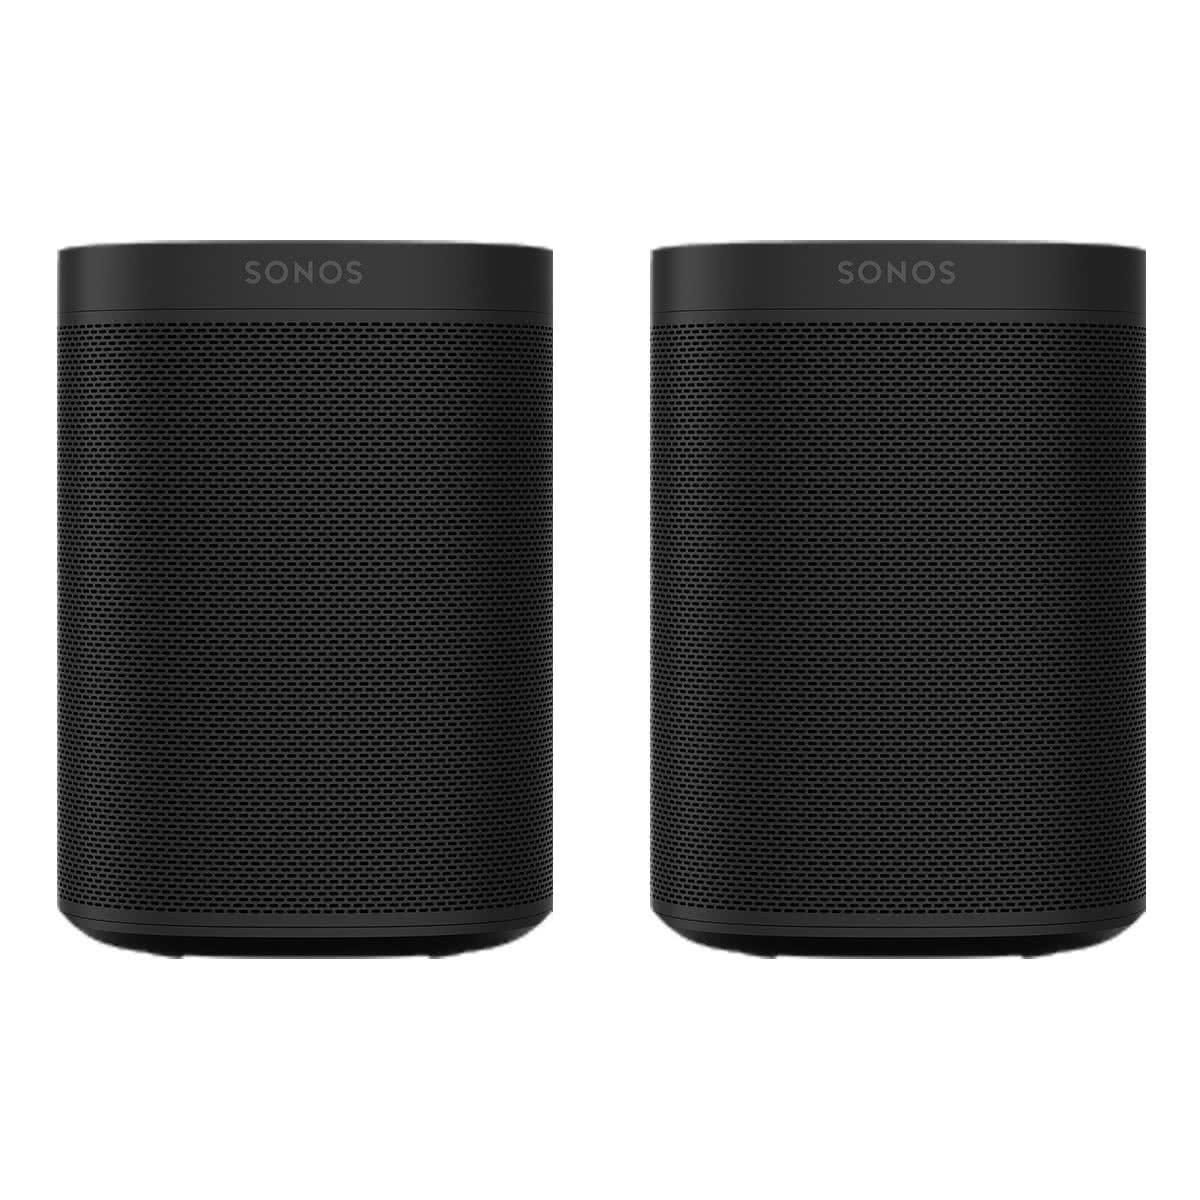 Sonos Two Room Set with Sonos One Gen 2 - Smart Speaker with Voice Control Built-In(Black) - image 1 of 4